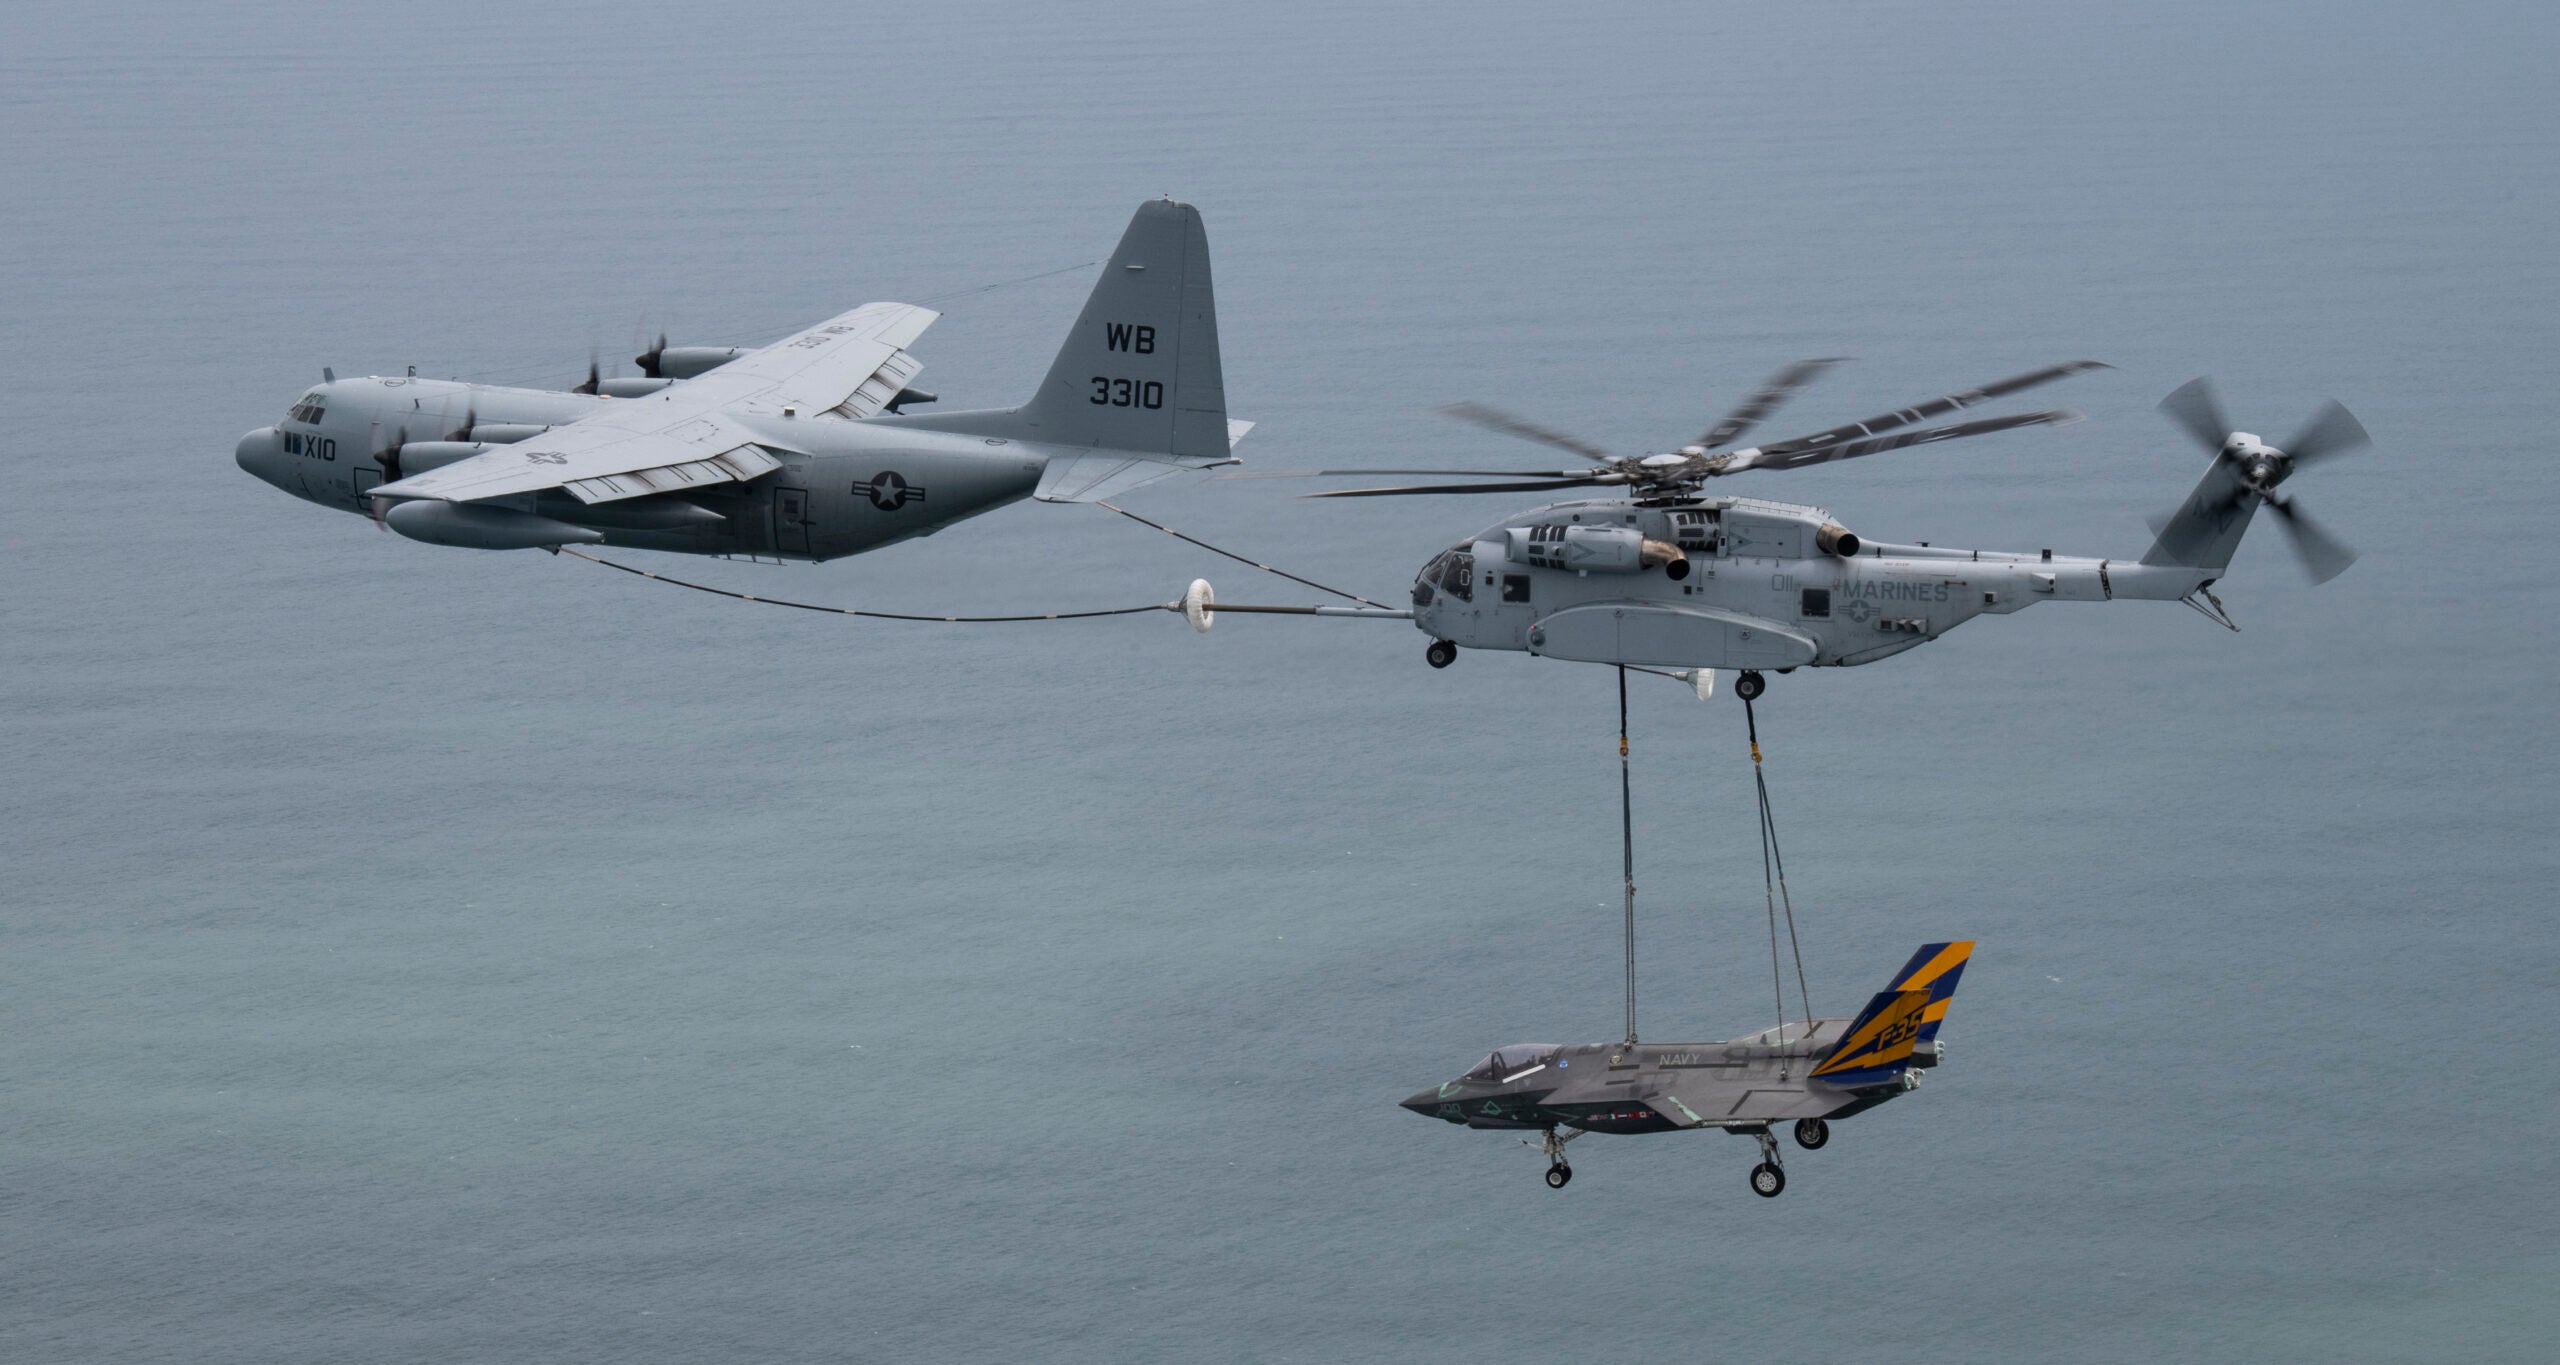 check out this navy tanker that's refueling a marine helicopter that's carrying a navy fighter